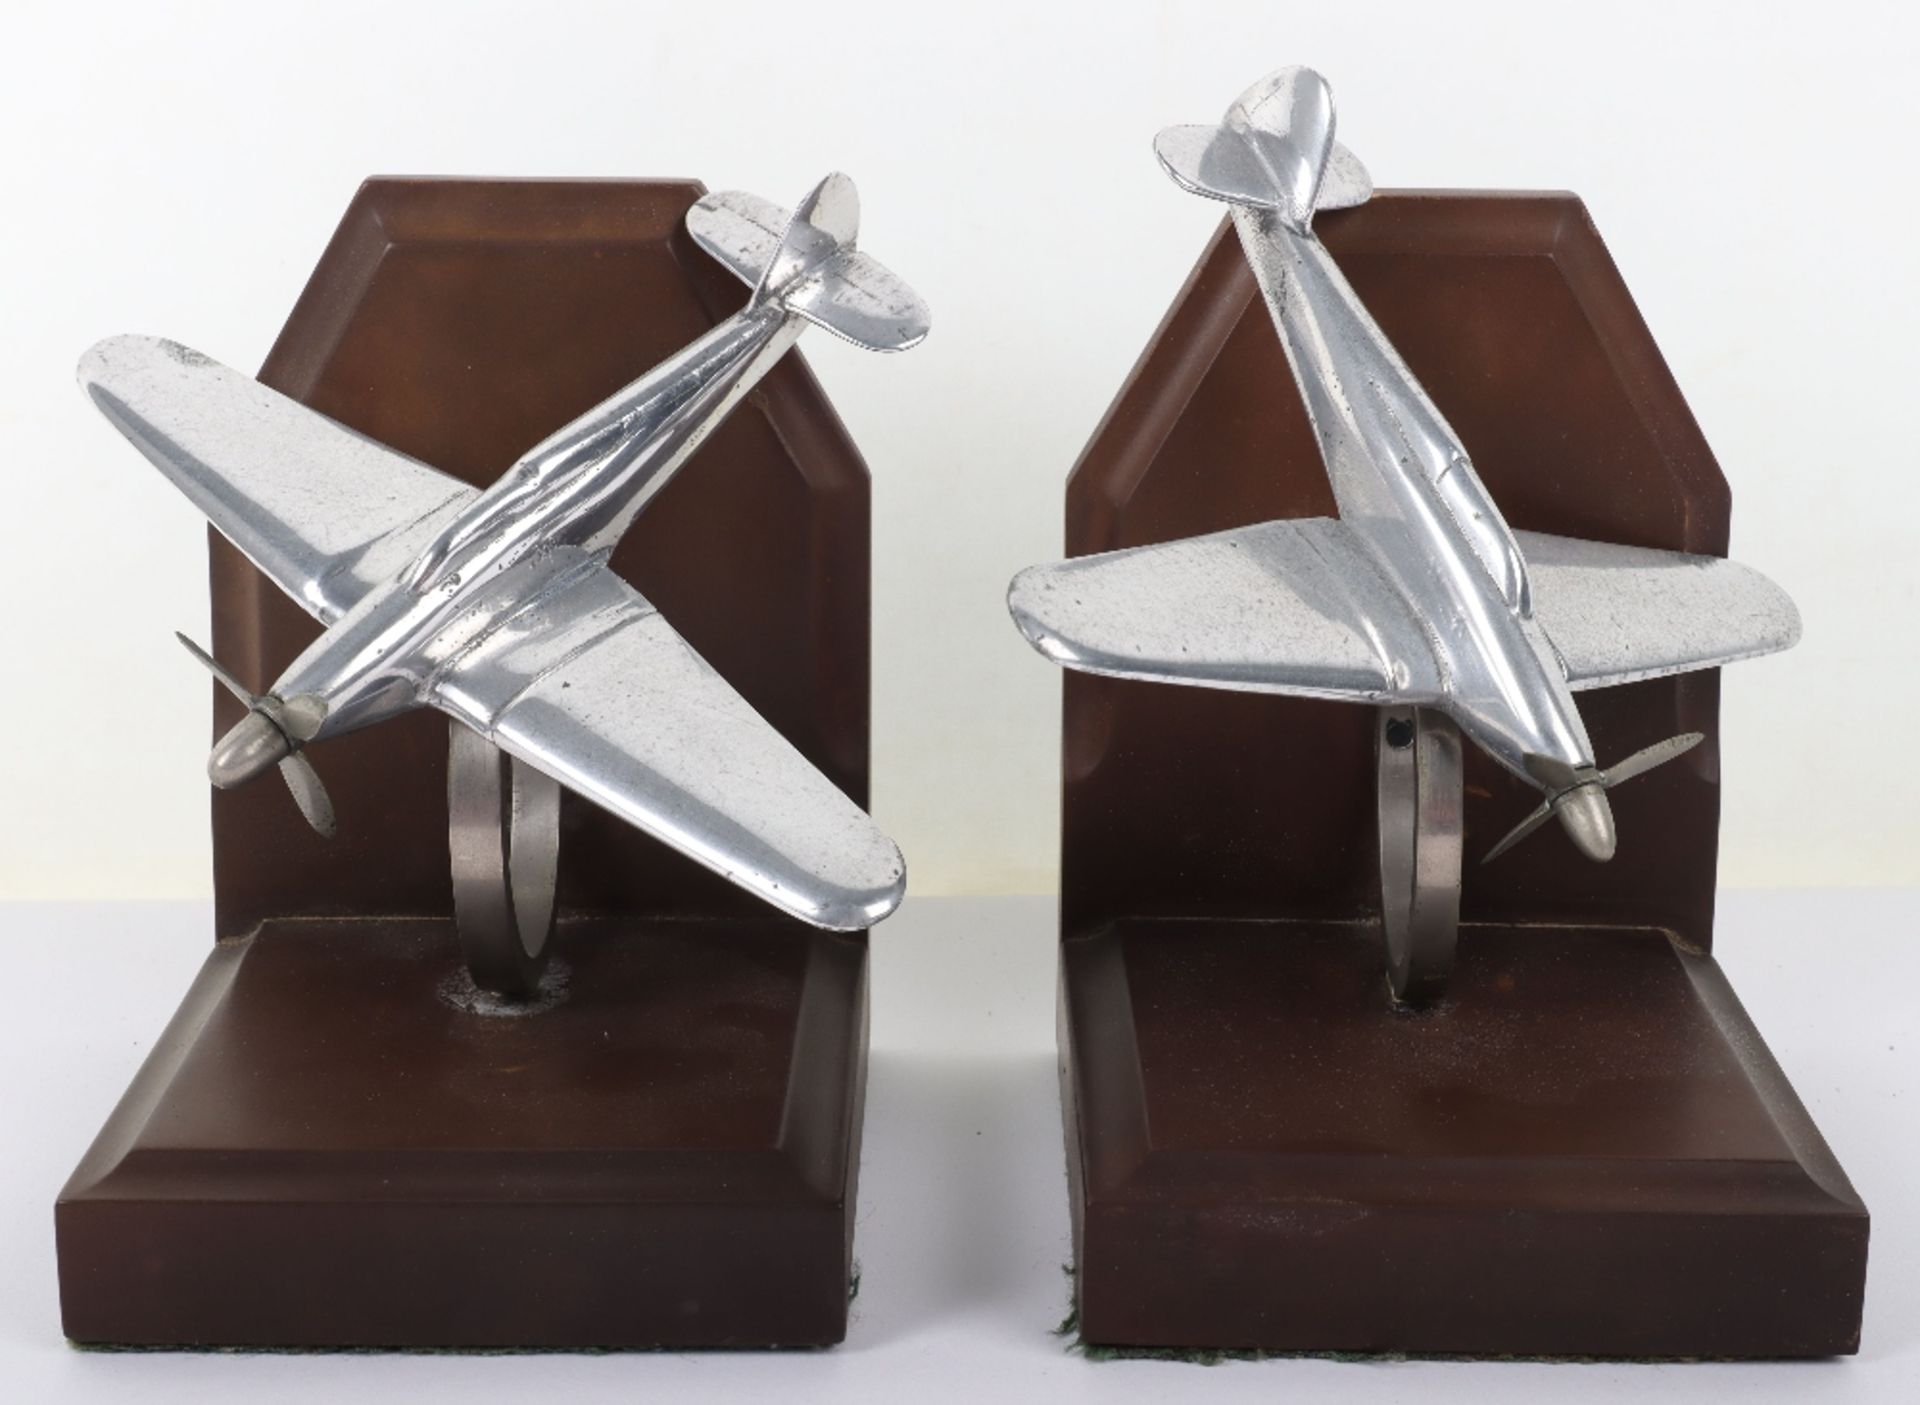 Pair of Bookends with Models of RAF Spitfire Aircraft